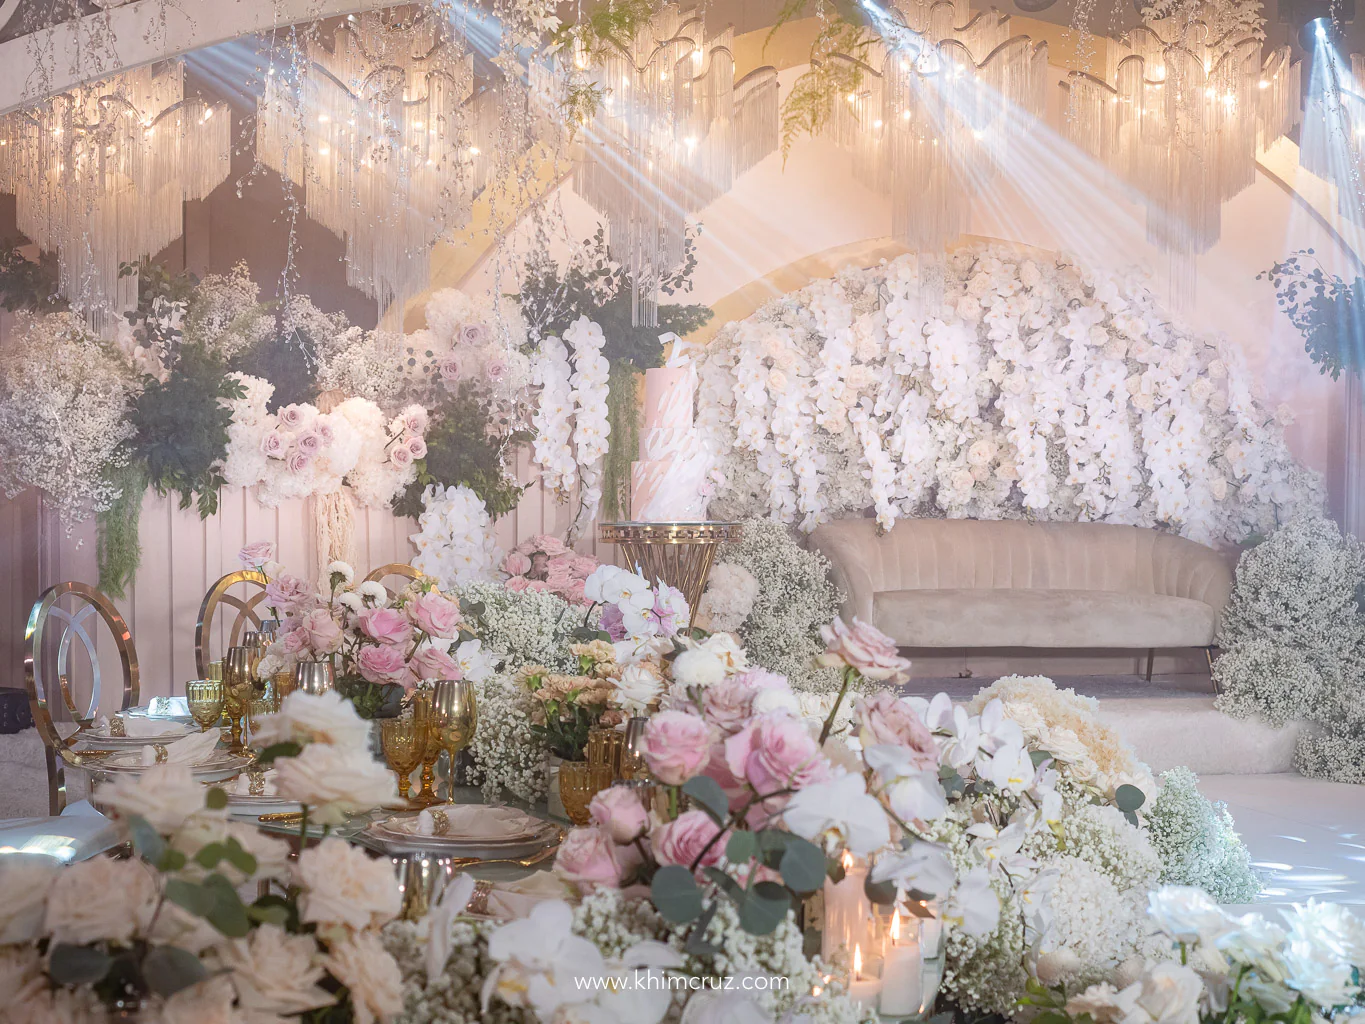 garden-inspired intimate wedding reception floral design works for a Nikah ceremony